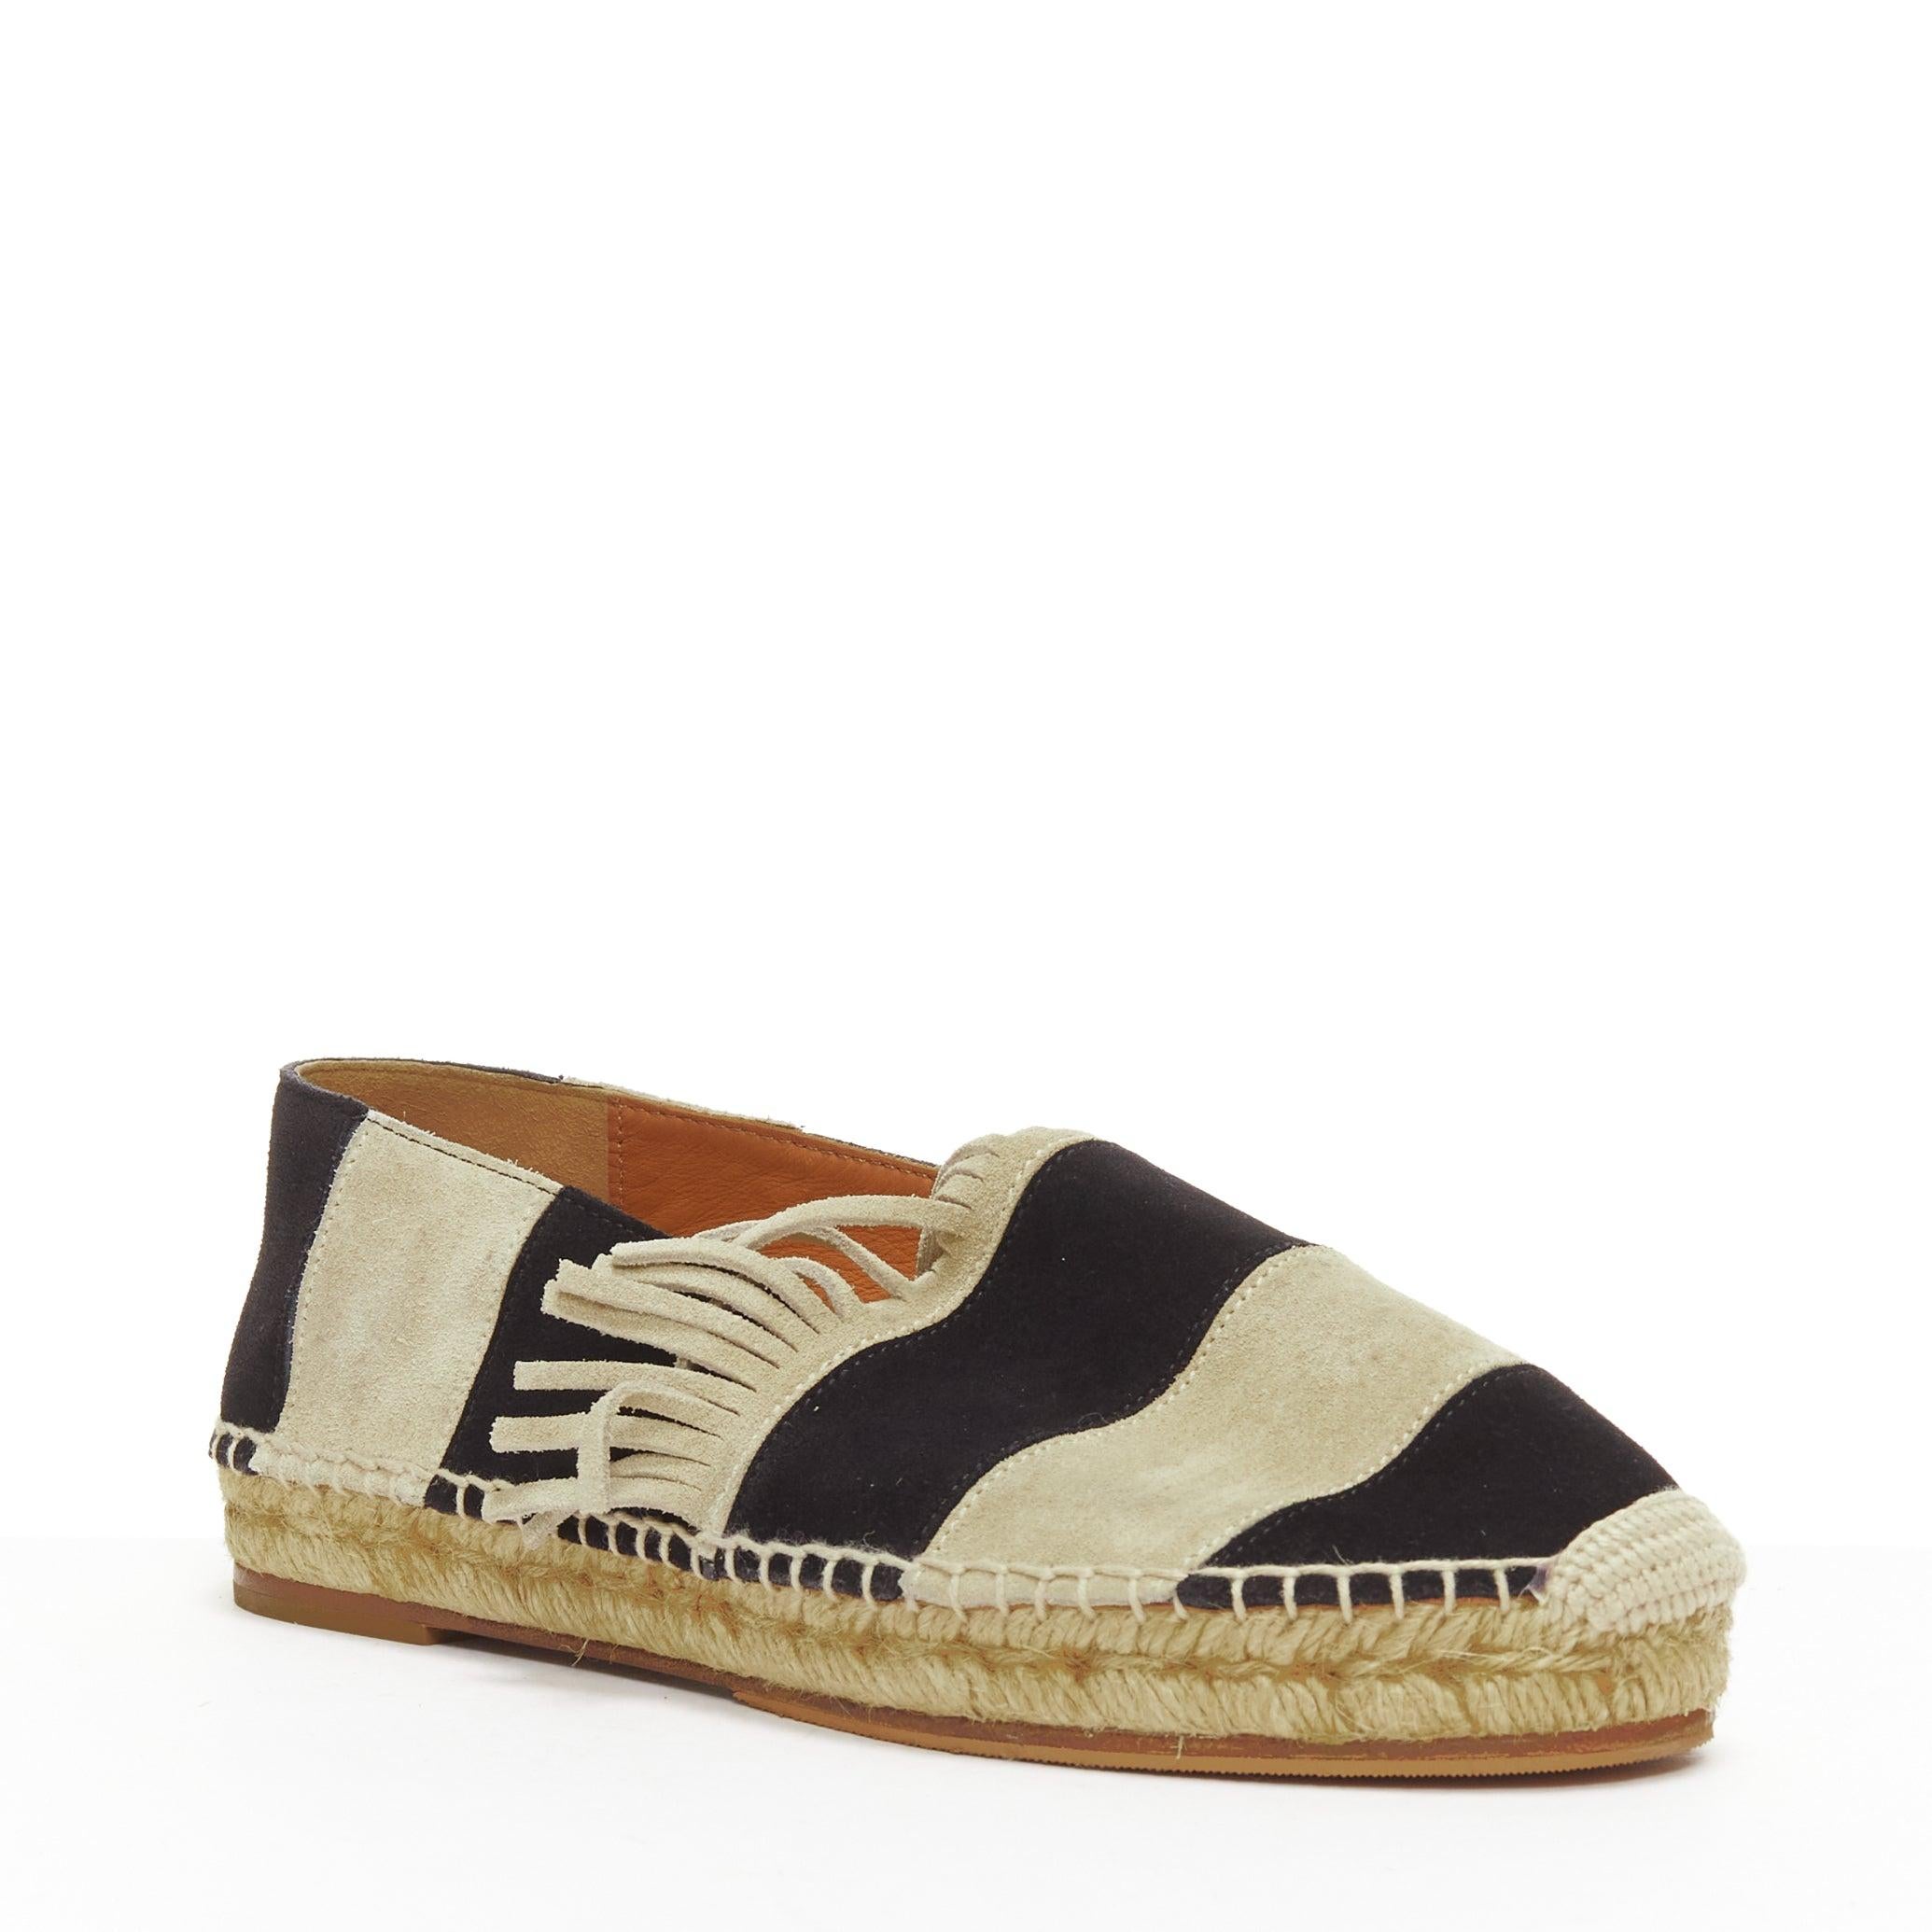 CHLOE beige black suede leather striped panels fringe slip on espadrilles EU37
Reference: NILI/A00063
Brand: Chloe
Material: Suede
Color: Black, Nude
Pattern: Striped
Closure: Slip On
Lining: Black Fabric
Made in: Spain

CONDITION:
Condition: Fair,